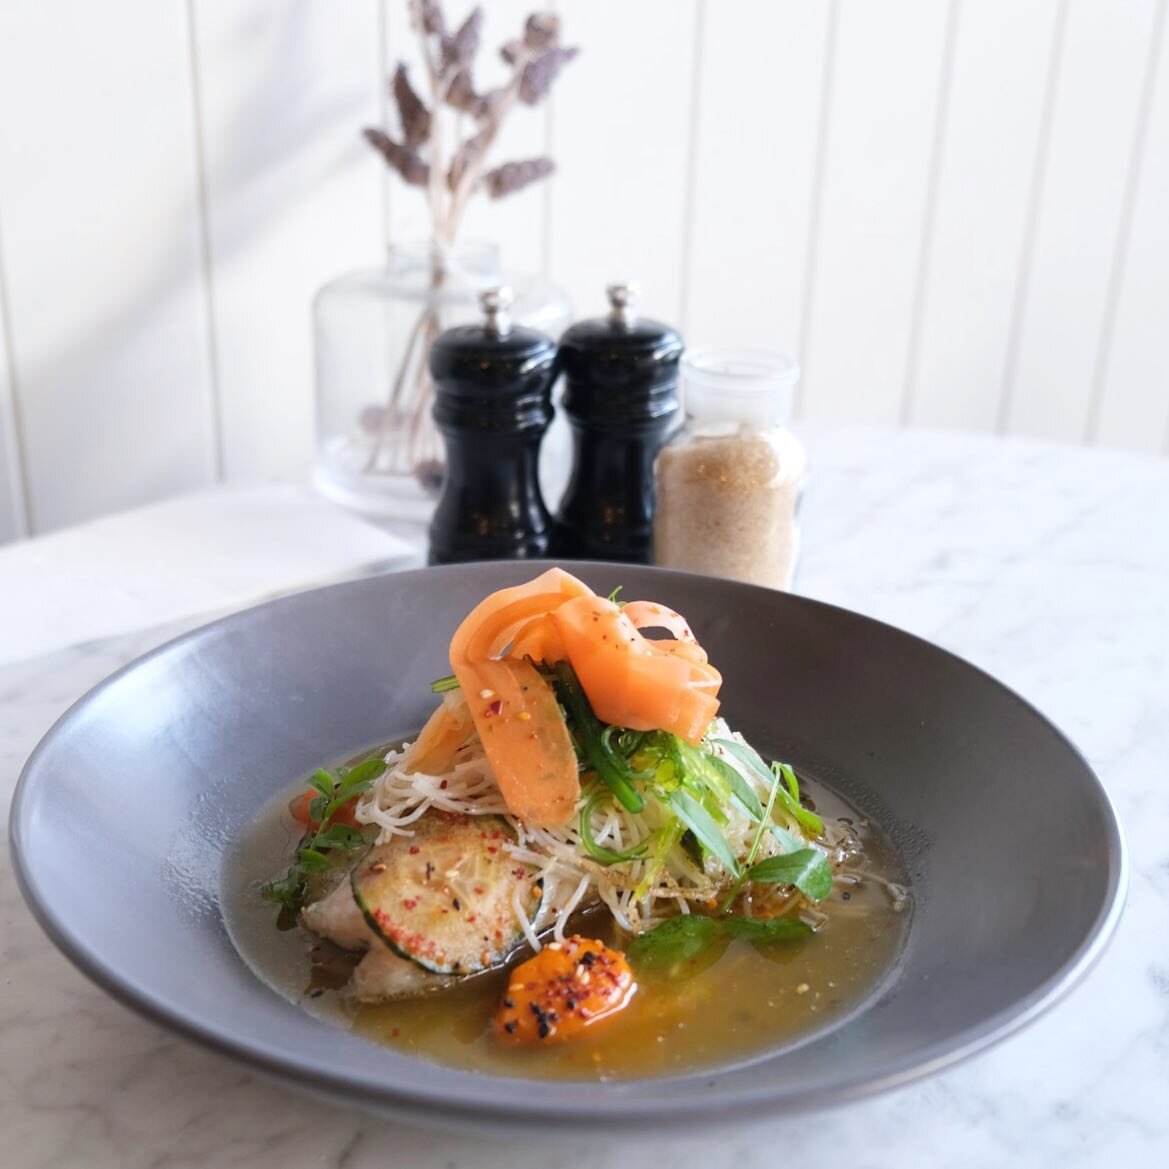 Baked Barramundi with carrot and ginger pur&eacute;e, bacon and dashi broth, rice noodles, picked carrot and hot and sour cucumbers. 

Just one of the amazingly warming new dishes from our winter menu!

Open until 2:30 today

.⁣
.⁣
.⁣
#breakfastinmel